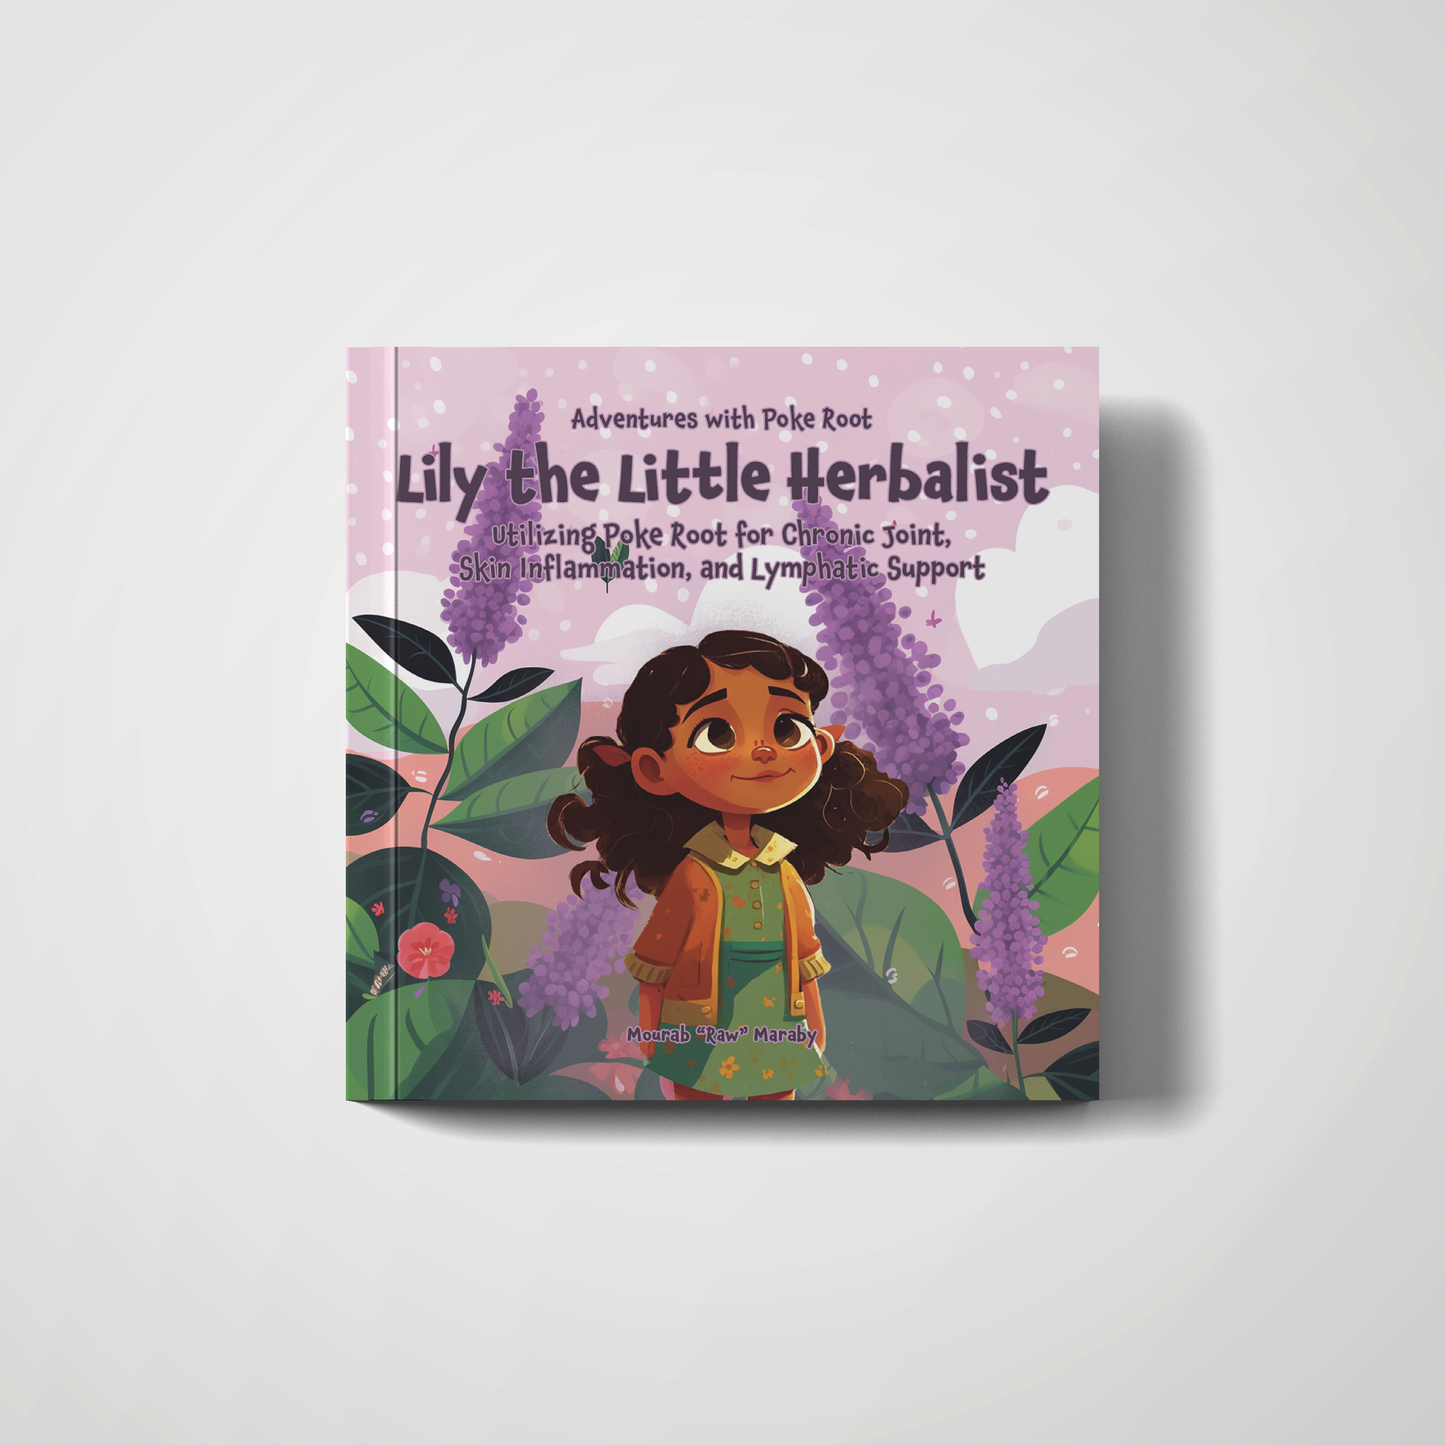 Lily The Little Herbalist: Adventures with Poke Root